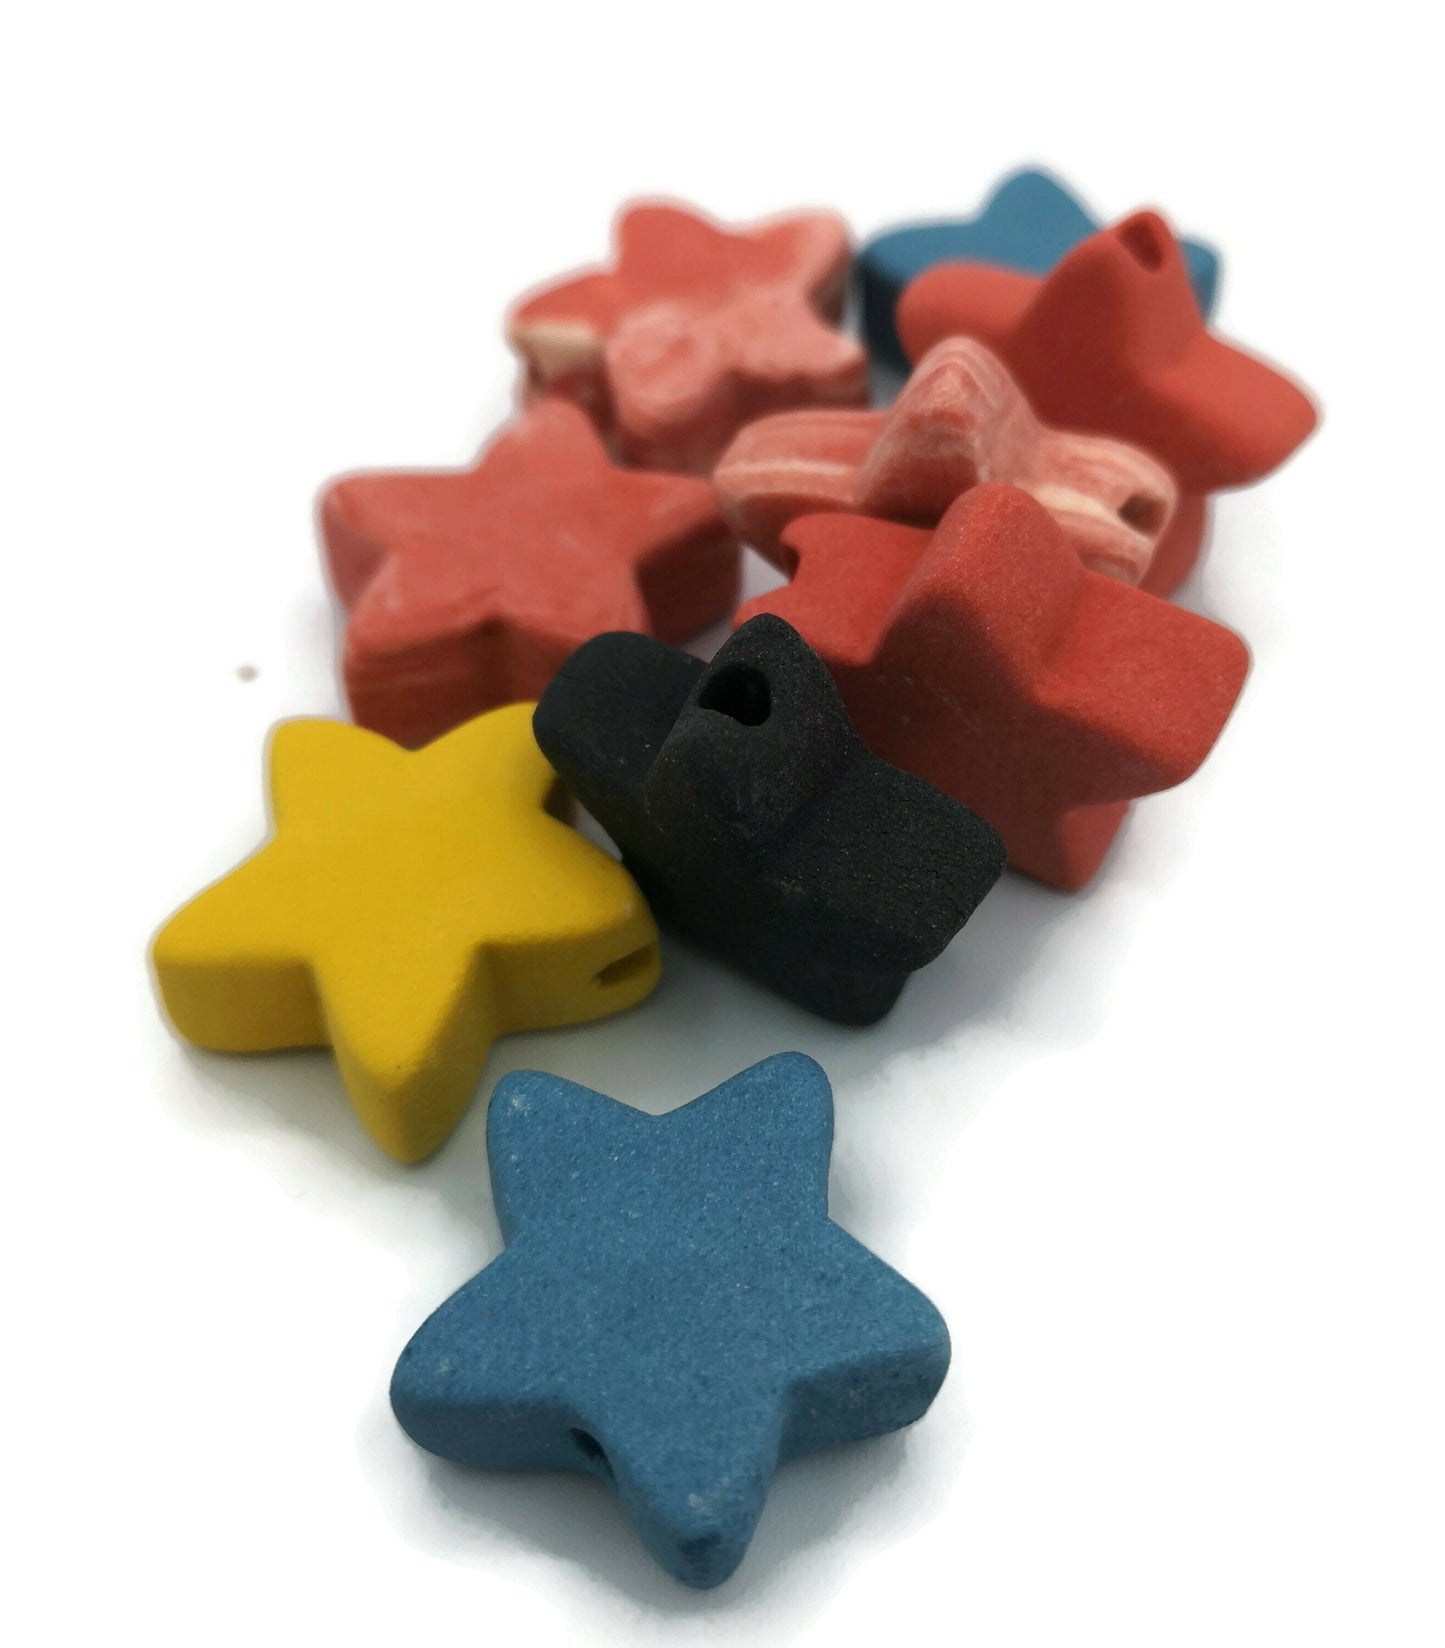 9Pc 25mm Assorted Large Star Ceramic Beads For Colorful Jewelry Making, Unique Matte Clay Beads, Unusual Macrame Beads Large Hole 2mm - Ceramica Ana Rafael